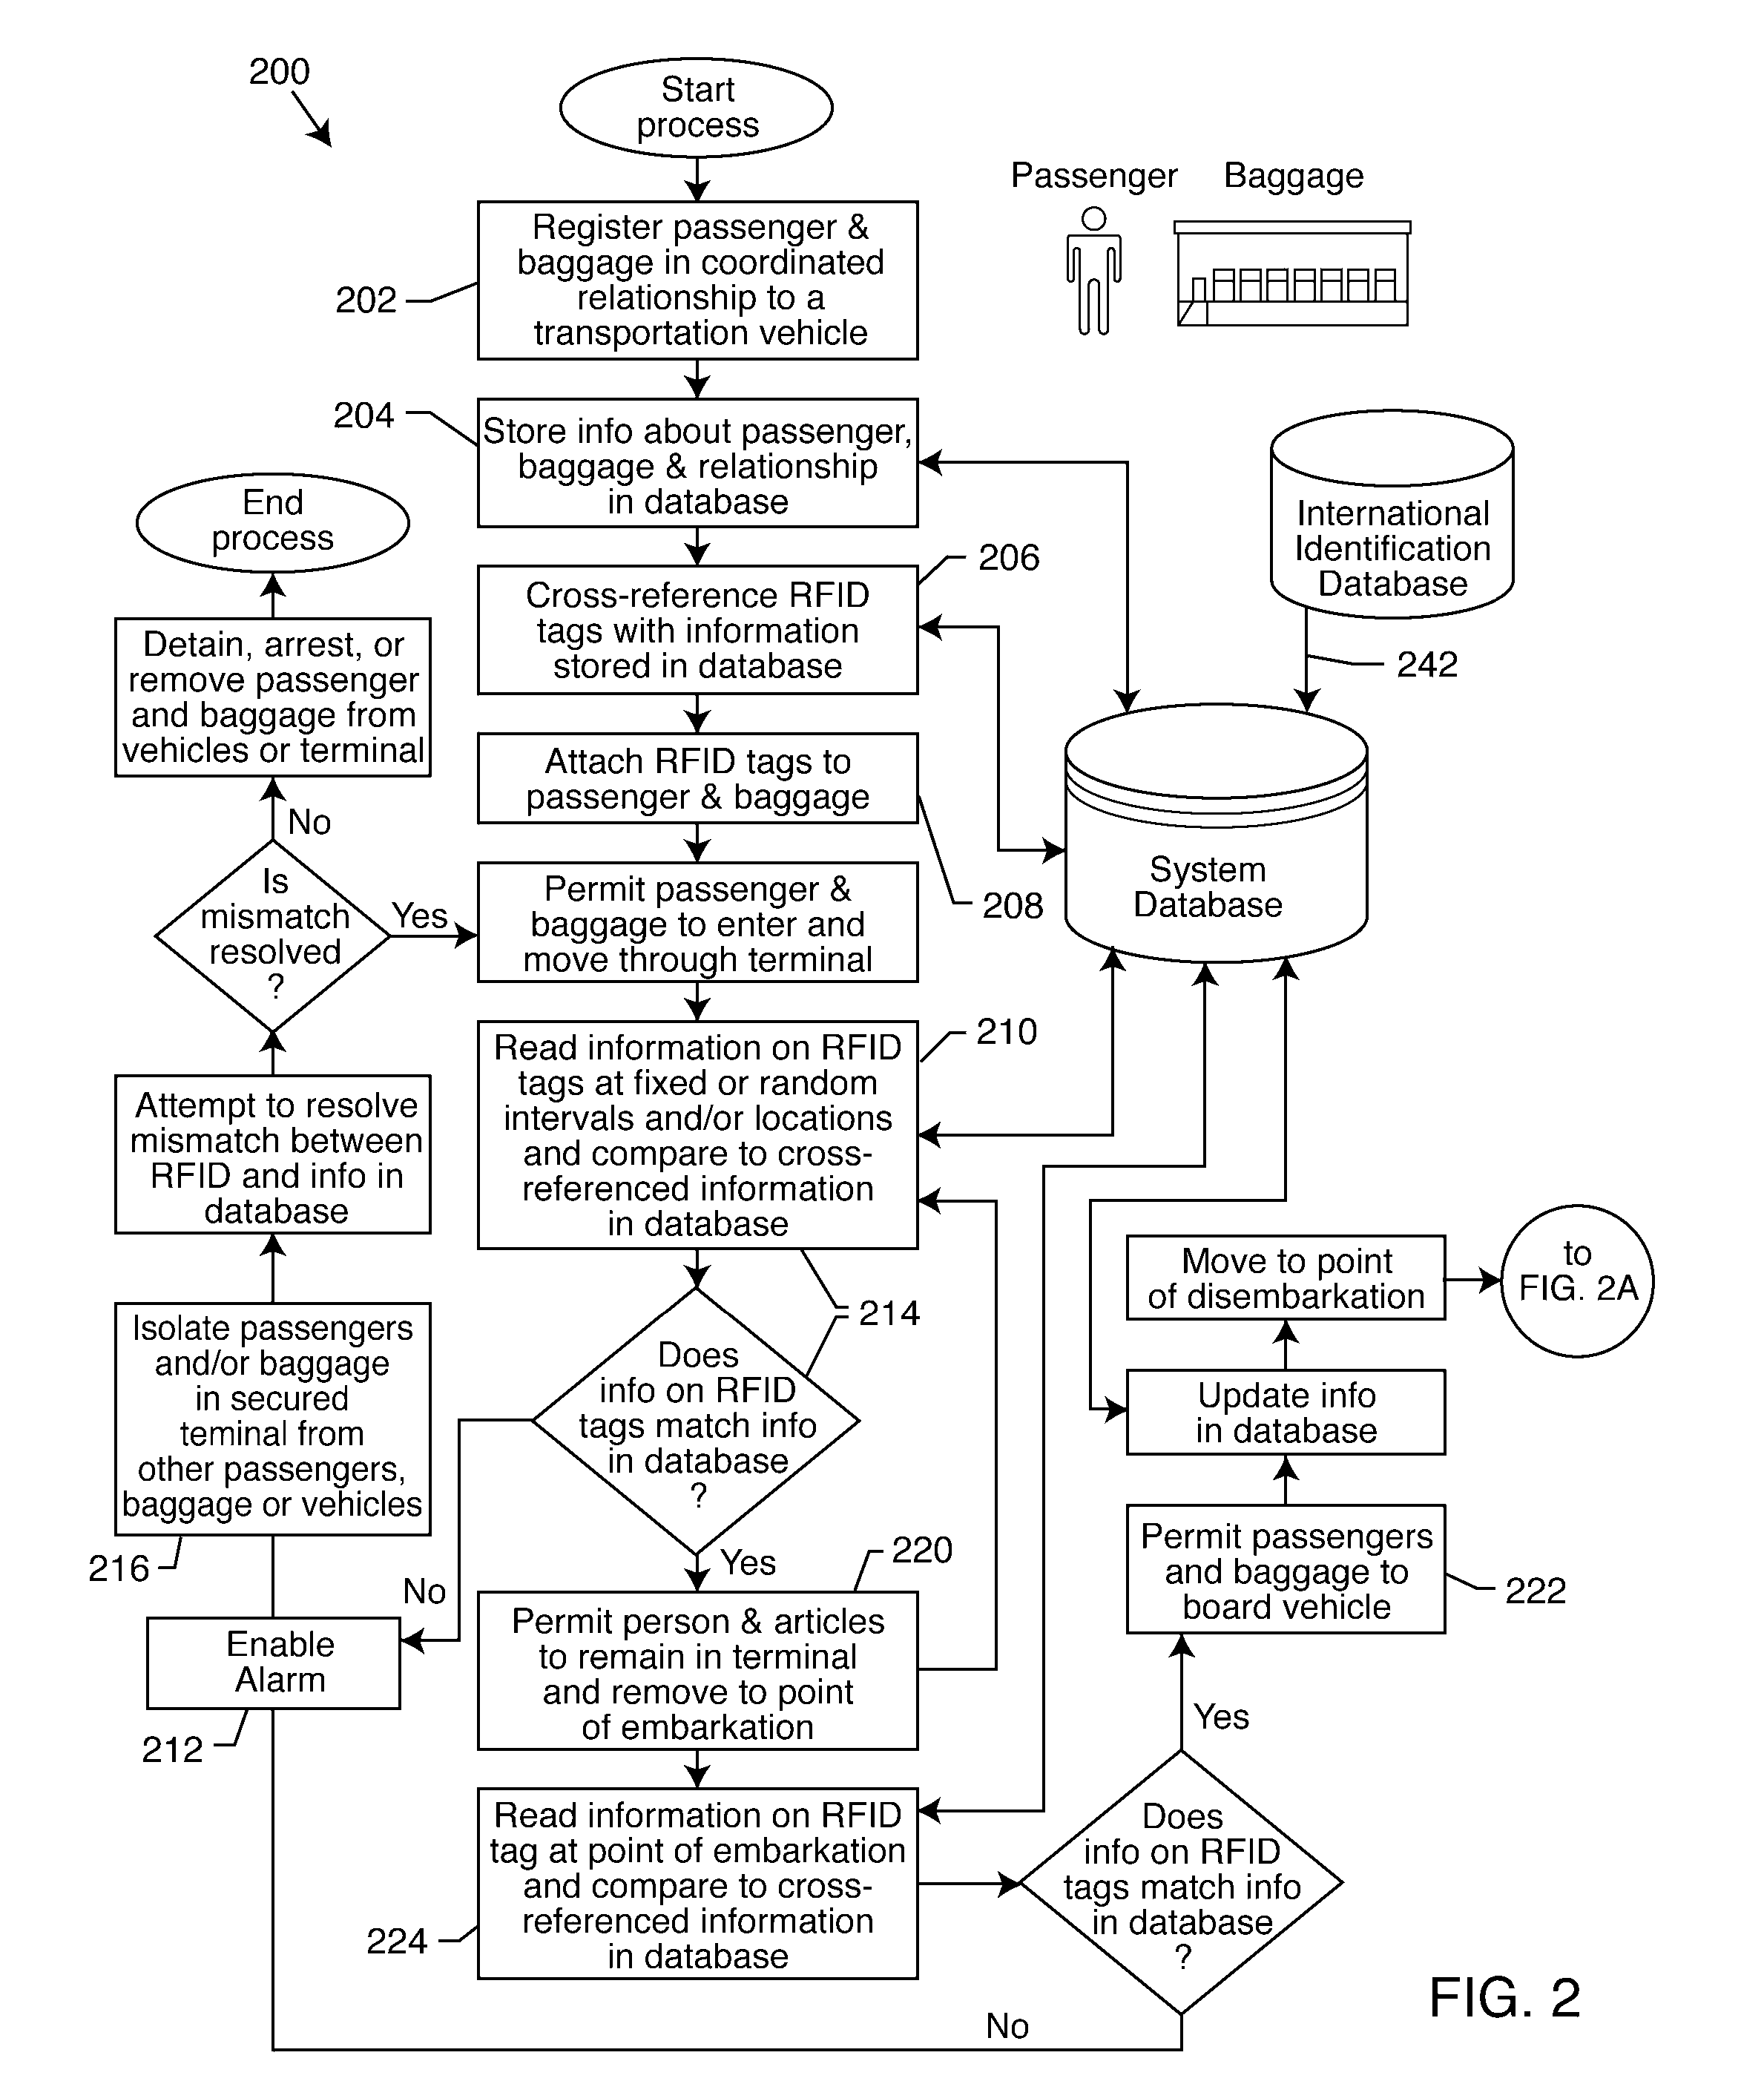 Coordinated identification of persons and/or articles via radio frequency identification cross-identification